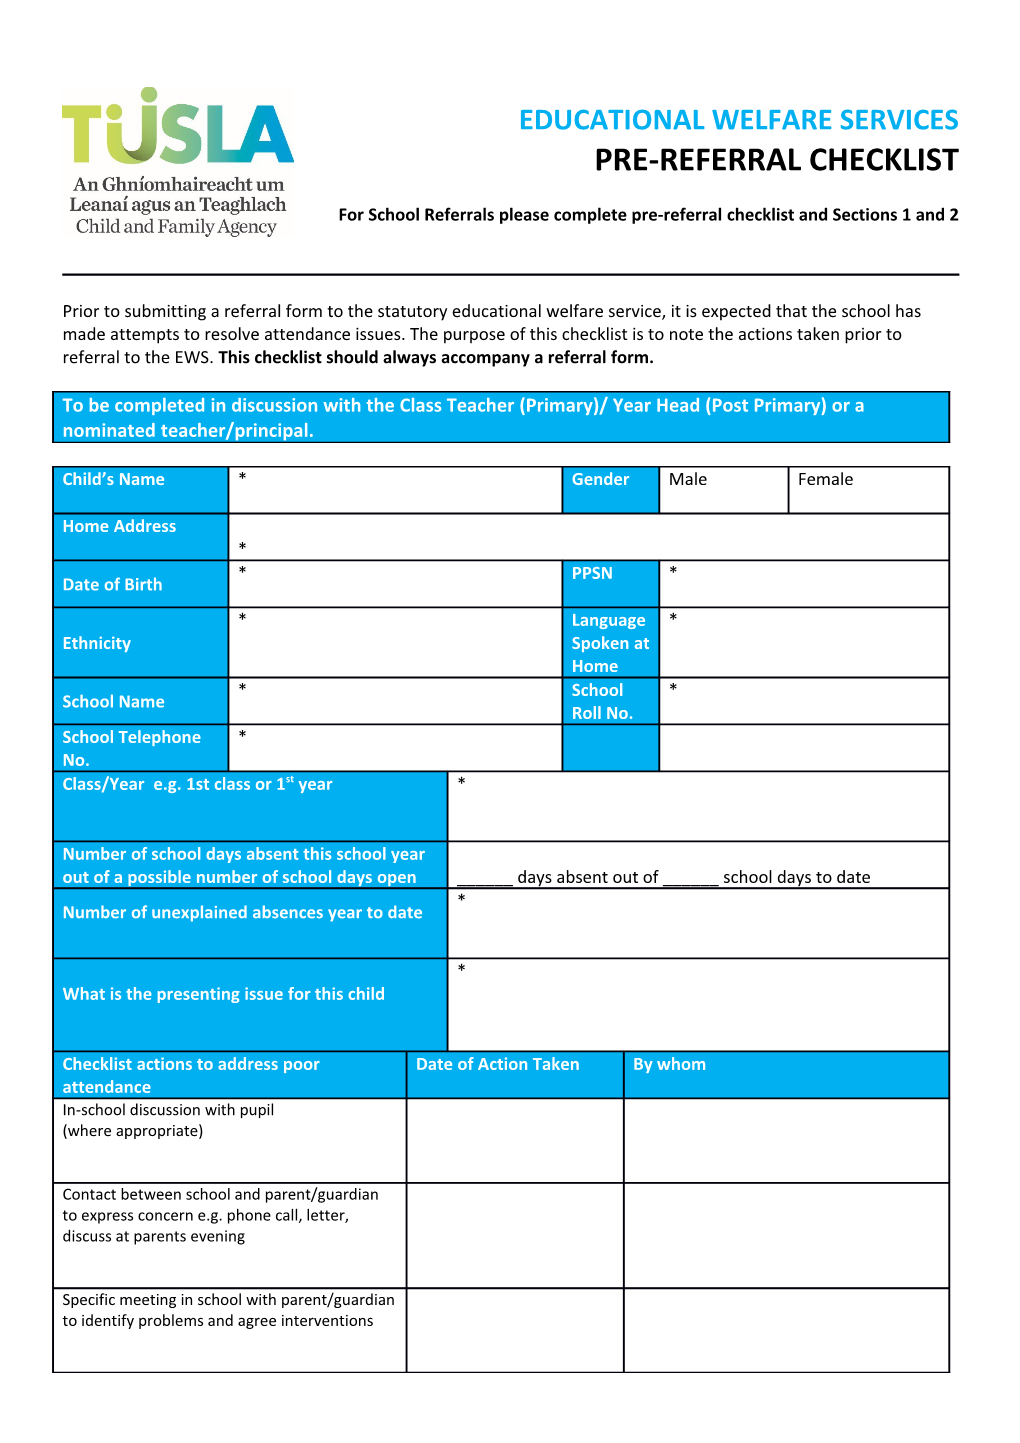 For School Referrals Please Complete Pre-Referral Checklist and Sections 1 and 2